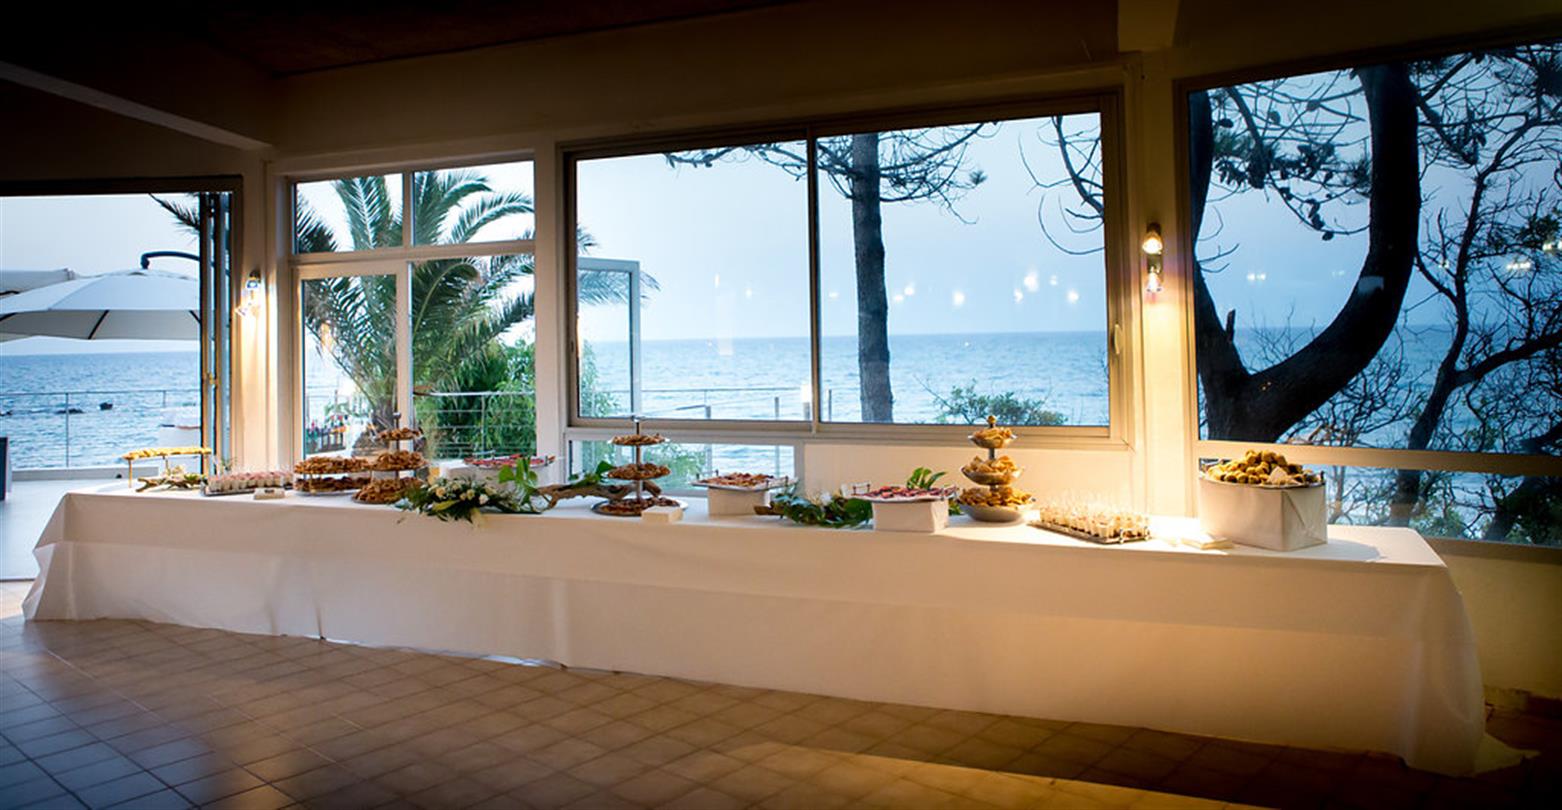 Reception room with beautiful view of the Mediterranean Sea - Naturist area of Bagheera